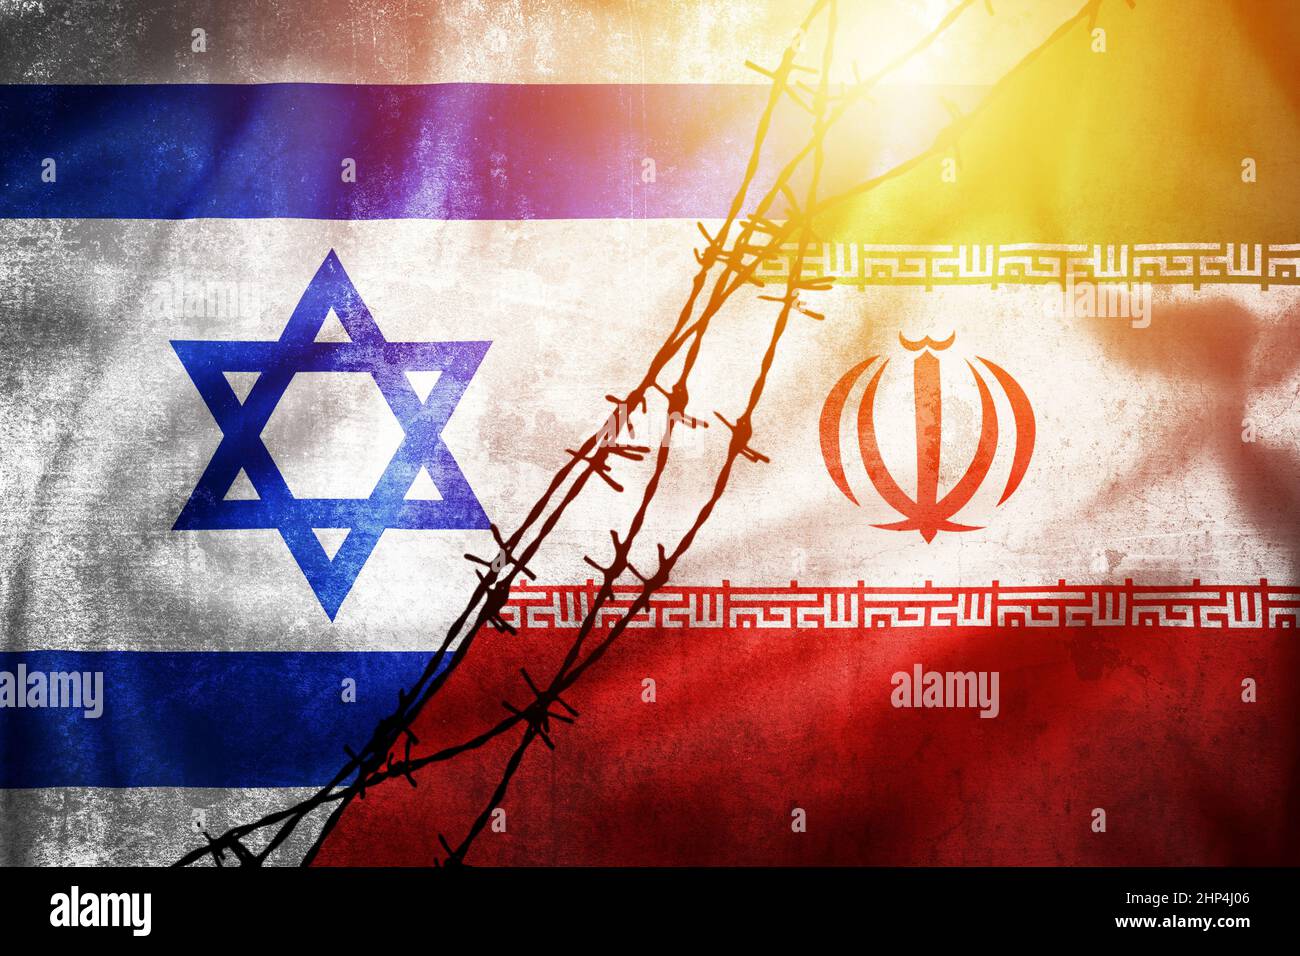 Grunge flags of Iran and Israel divided by barb wire sun haze illustration, concept of tense relations between Iran and Israel Stock Photo